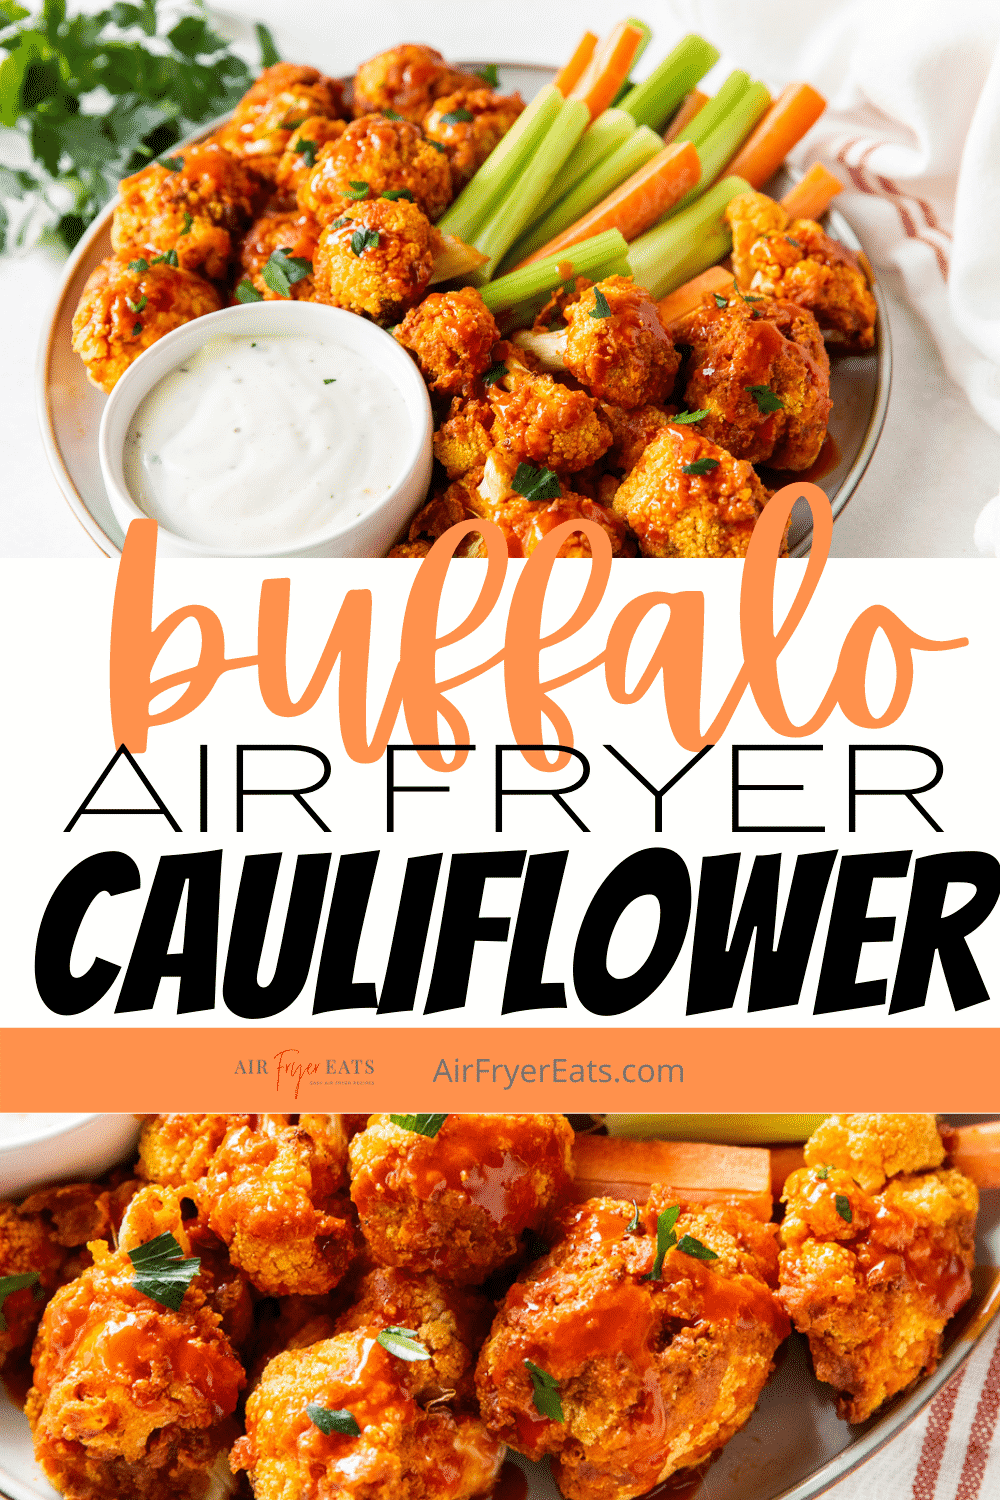 Air Fryer Buffalo Cauliflower is the spicy vegetarian finger food that you've been waiting for. Tender Cauliflower florets, lightly breaded and tossed with buffalo sauce are an amazing appetizer that everyone will enjoy. #airfryer #buffalocauliflower via @vegetarianmamma